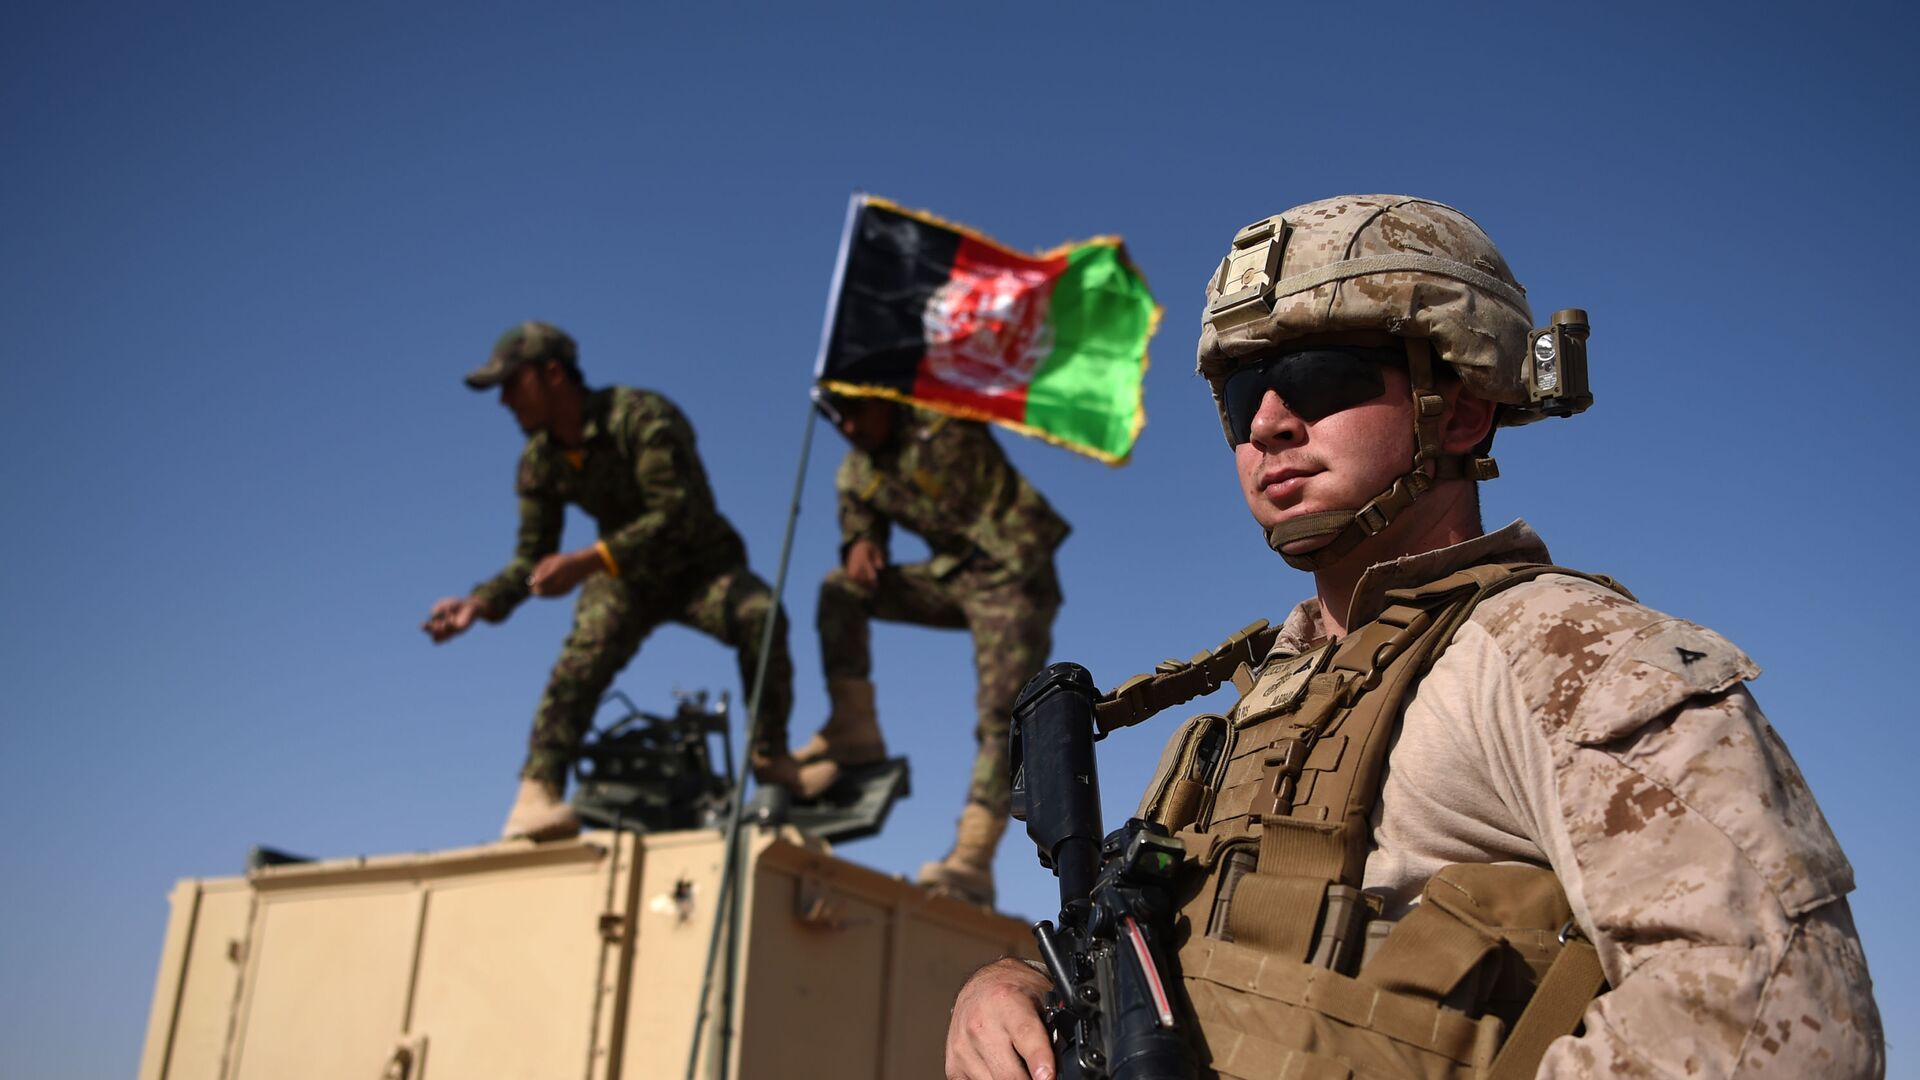 In this photograph taken on August 28, 2017, a US Marine looks on as Afghan National Army soldiers raise the Afghan National flag on an armed vehicle during a training exercise to deal with IEDs (improvised explosive devices) at the Shorab Military Camp in Lashkar Gah in Helmand province. - Marines in Afghanistan's Helmand say Donald Trump's decision to keep boots on the ground indefinitely gives them all the time in the world to retake the province, once the symbol of US intervention but now a Taliban stronghold. They may need it. At the hot, dusty Camp Shorab, where many of the recently deployed Marines train their Afghan counterparts in flat, desert terrain, the Afghans admit th - اسپوتنیک افغانستان  , 1920, 02.01.2022